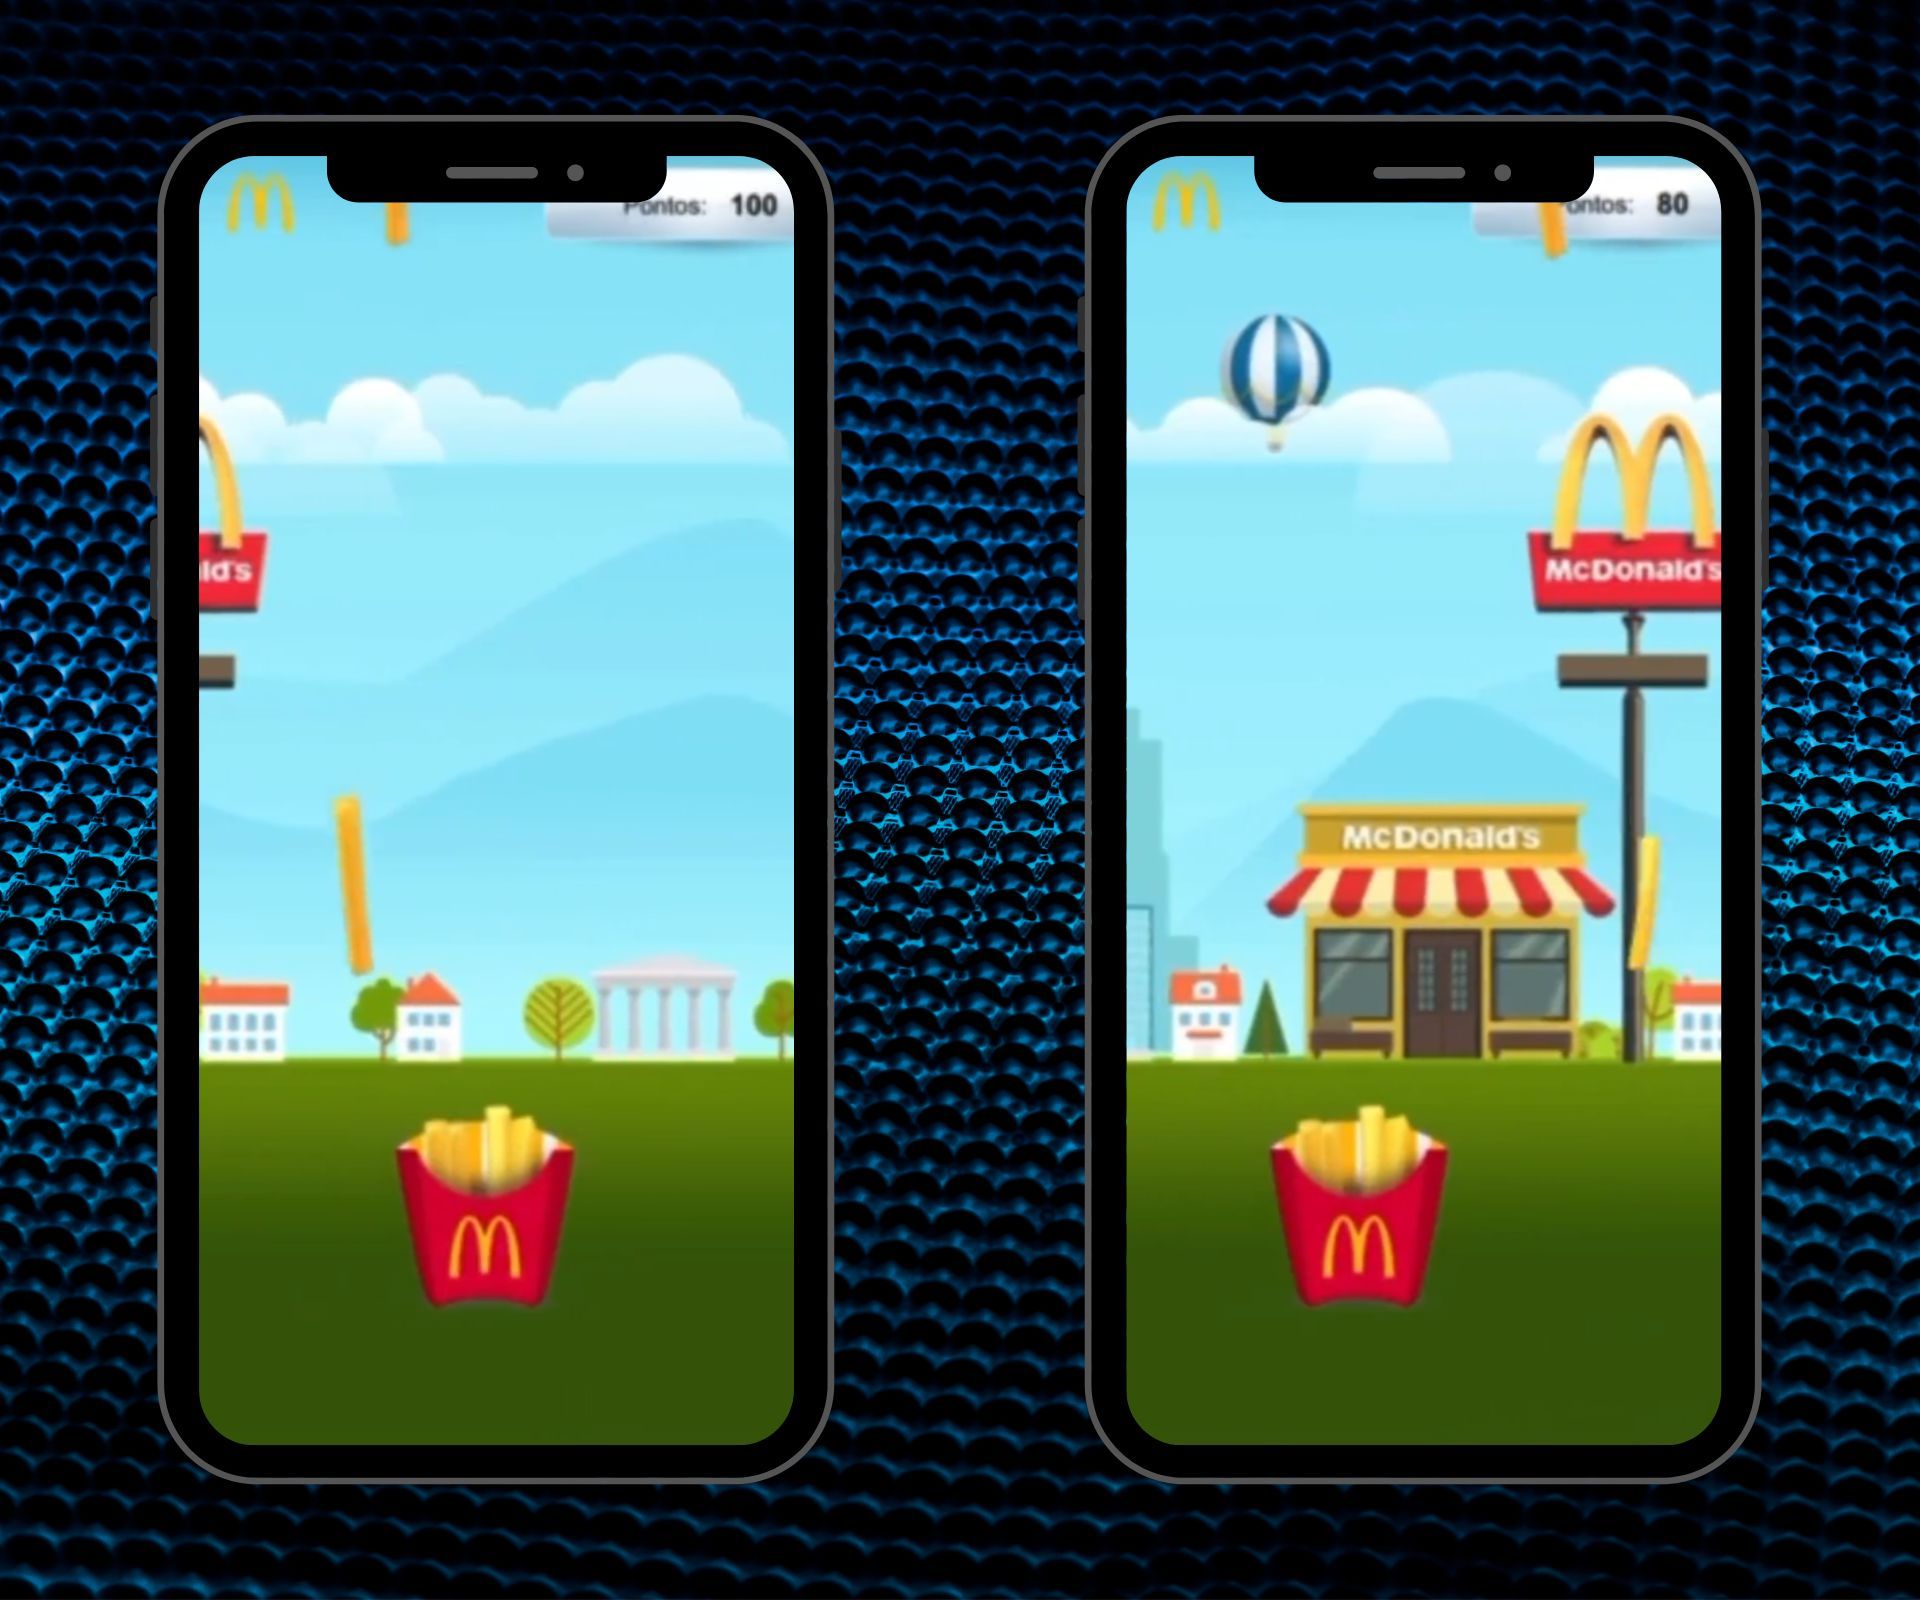 McDonald's promo game created with GDevelop. 